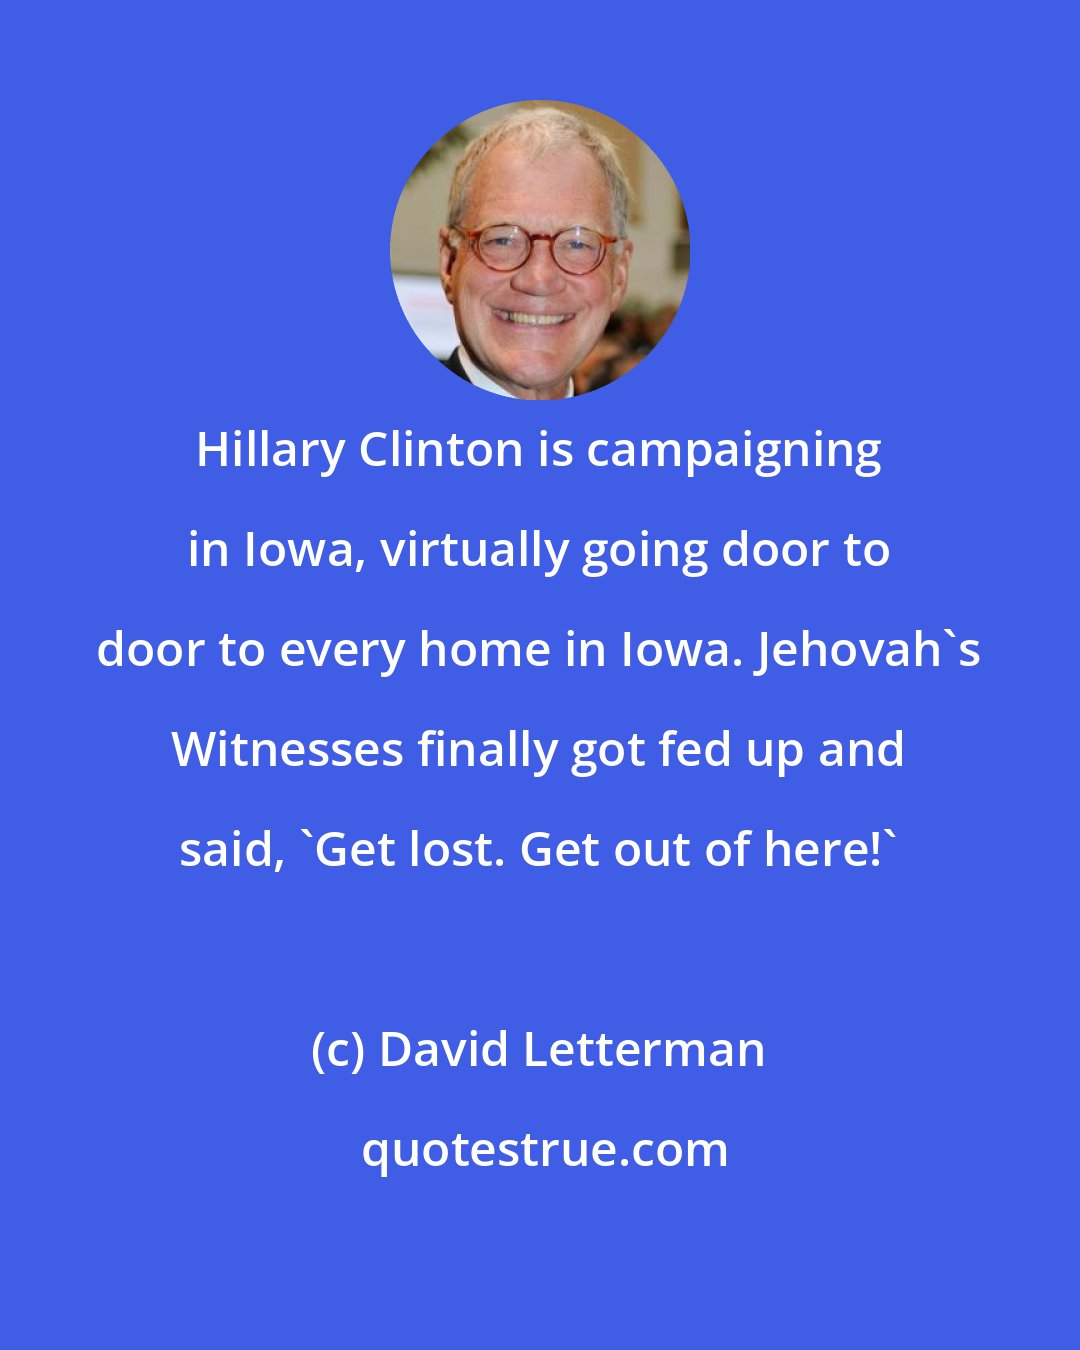 David Letterman: Hillary Clinton is campaigning in Iowa, virtually going door to door to every home in Iowa. Jehovah's Witnesses finally got fed up and said, 'Get lost. Get out of here!'